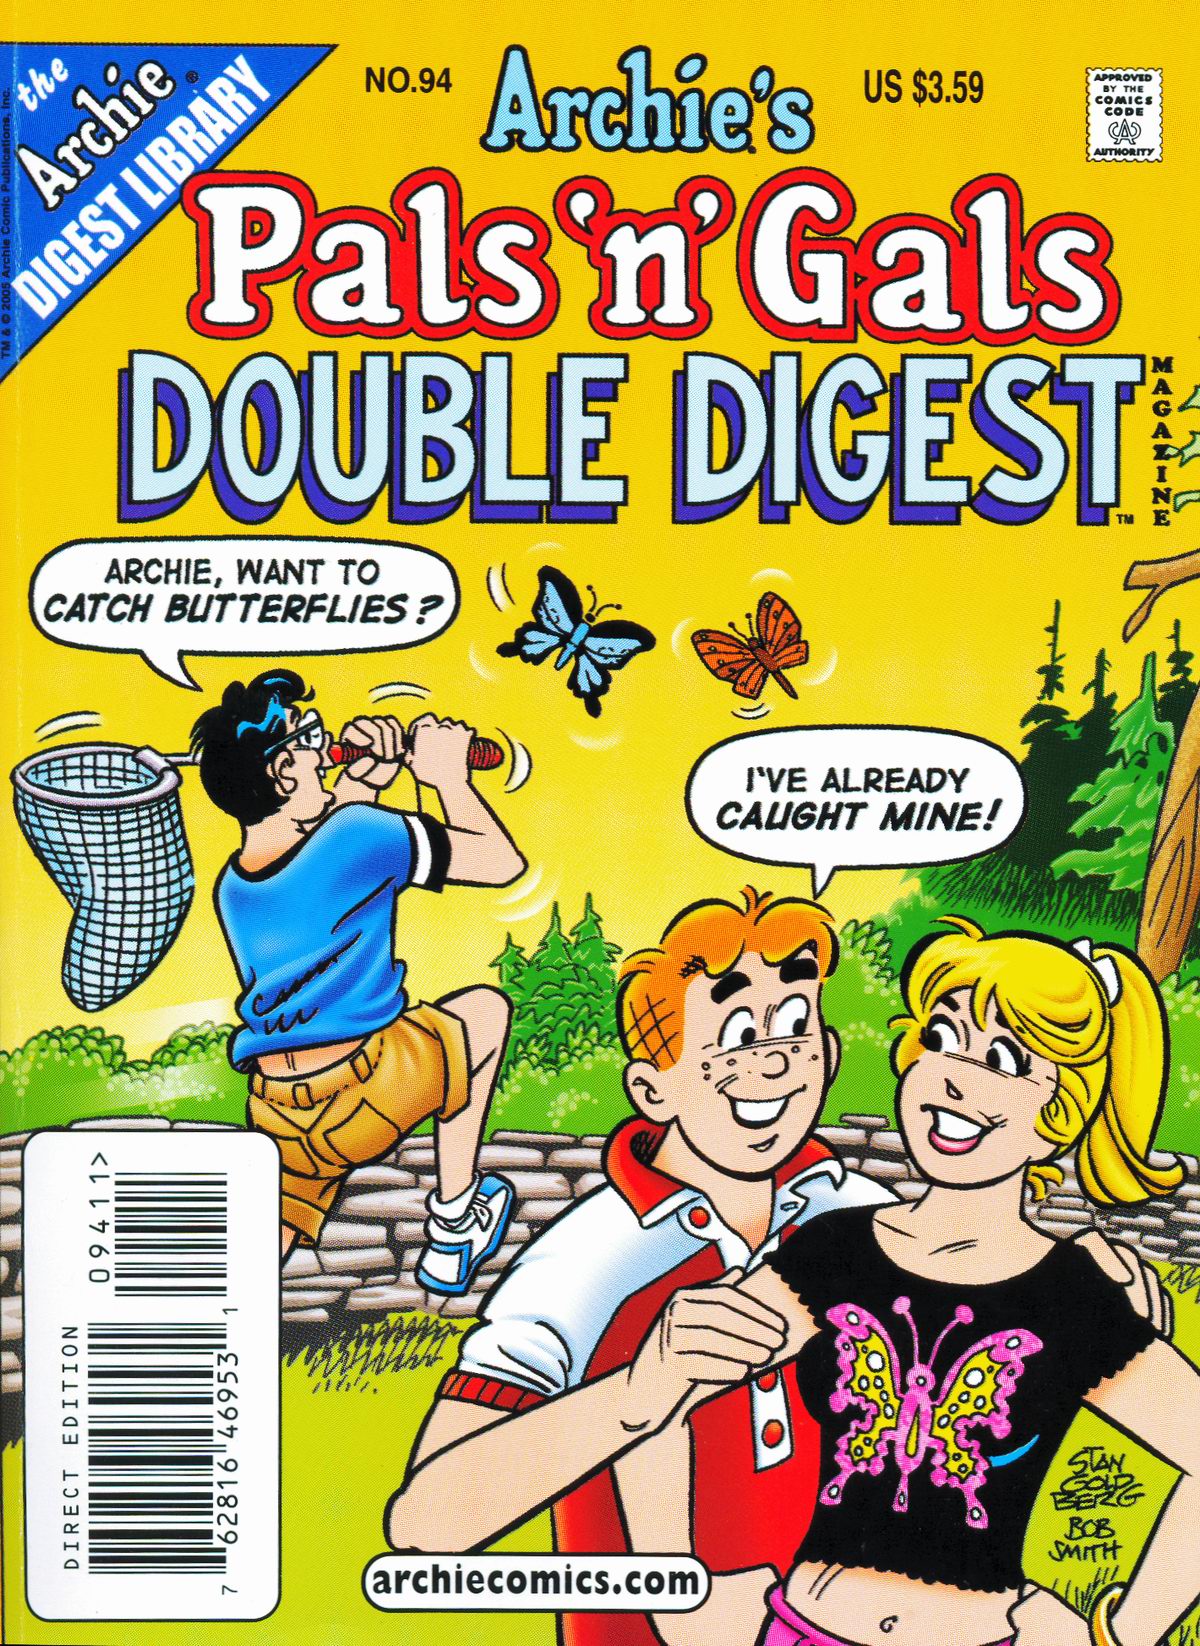 Archie's Pals 'n' Gals Double Digest Magazine issue 94 - Page 1